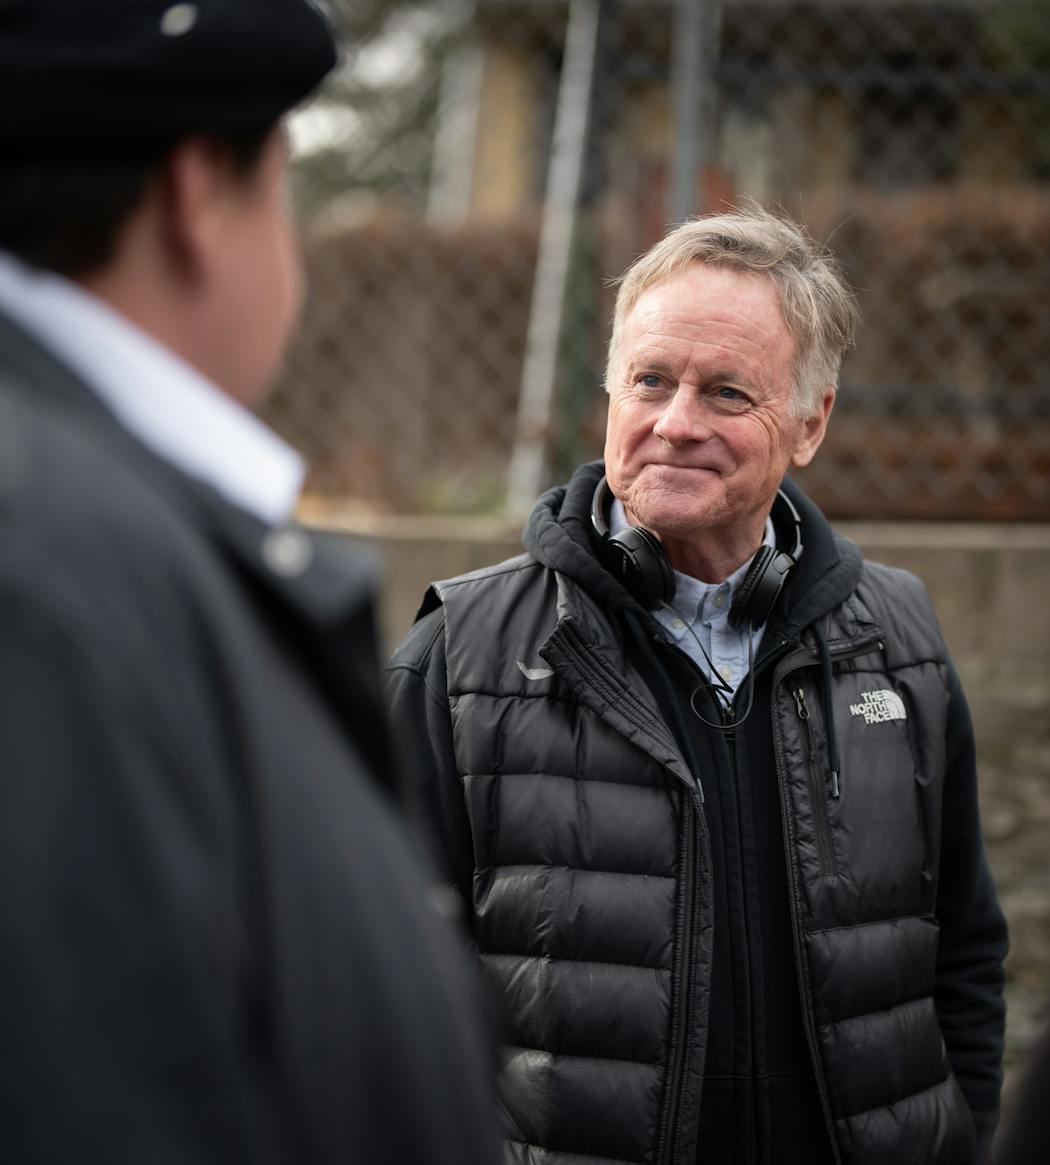 Director Patrick Coyle talked with actor Ernest Briggs as they filmed a scene near Coyle's house. After raising his daughters in south Minneapolis, Coyle and his wife moved to St. Paul four years ago. 